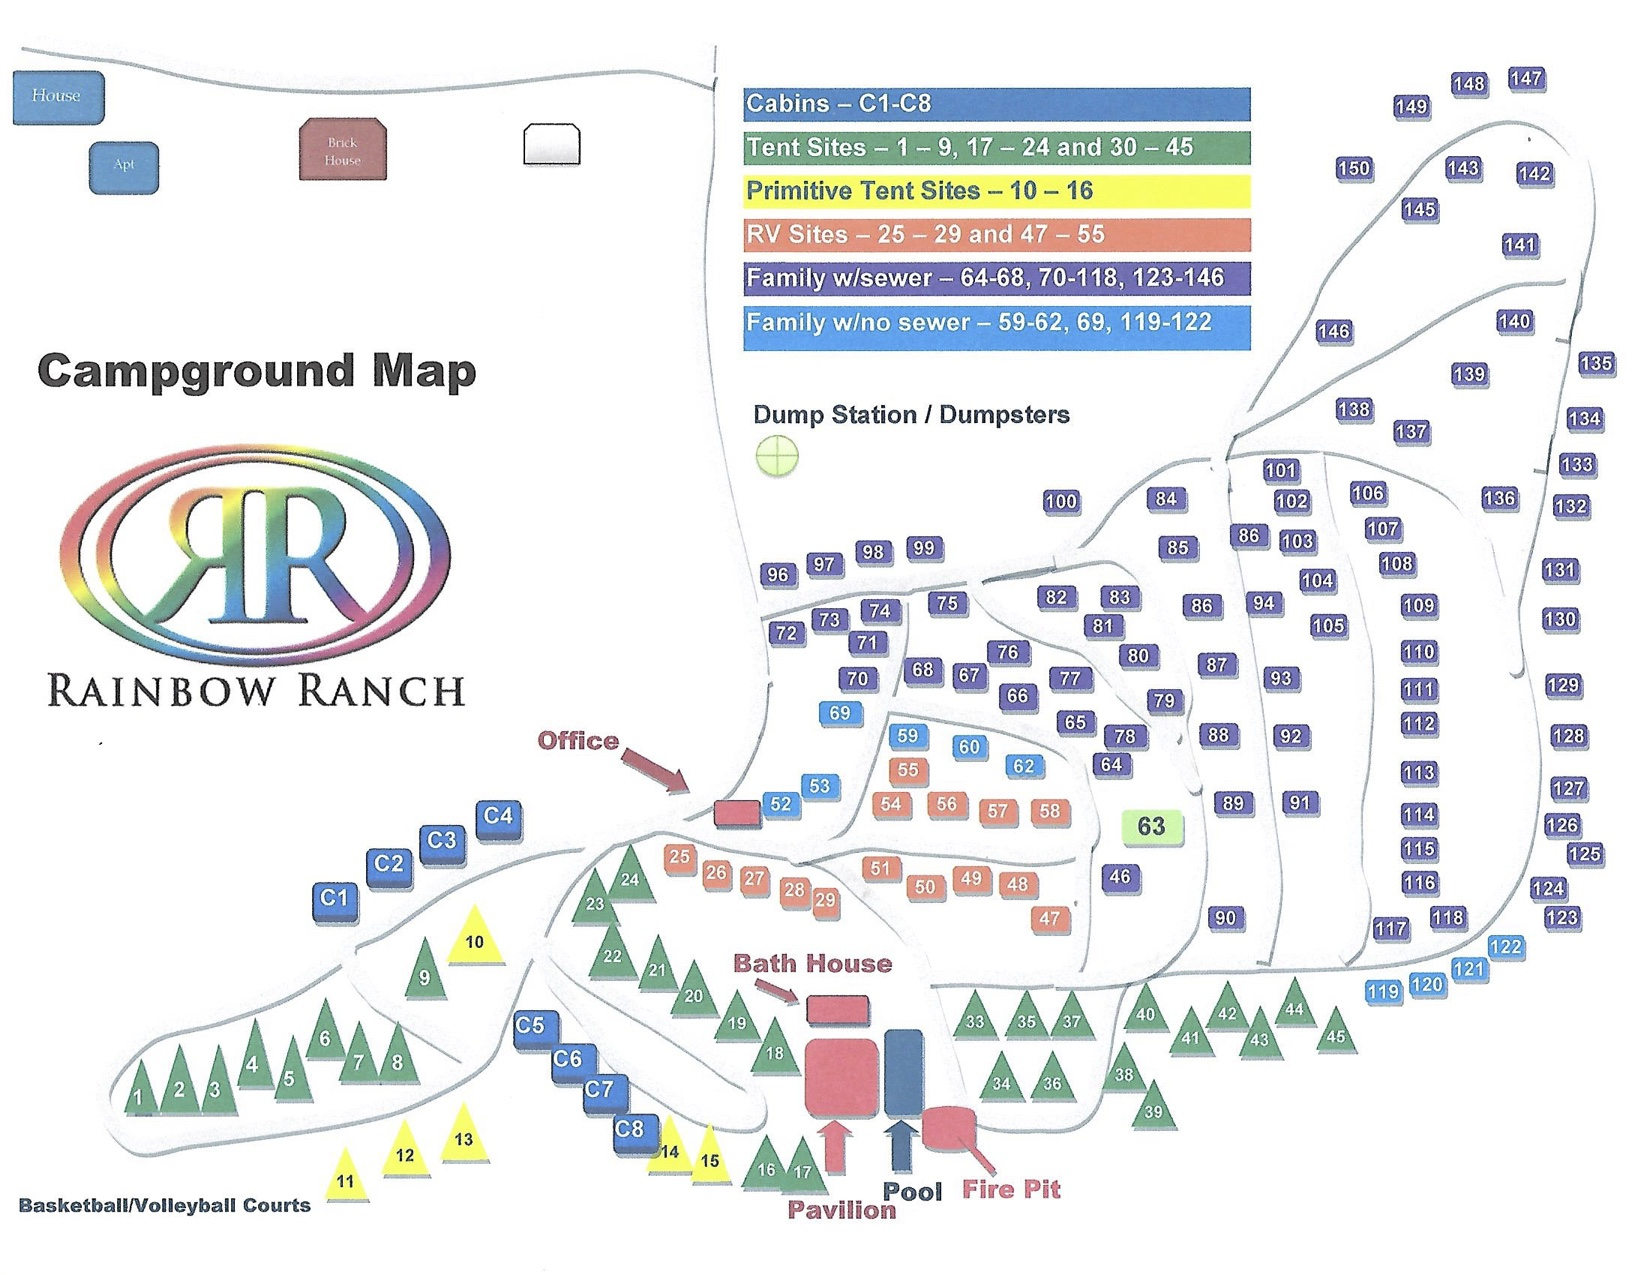 Campground Map | Rainbow Ranch - Texas Campgrounds Map